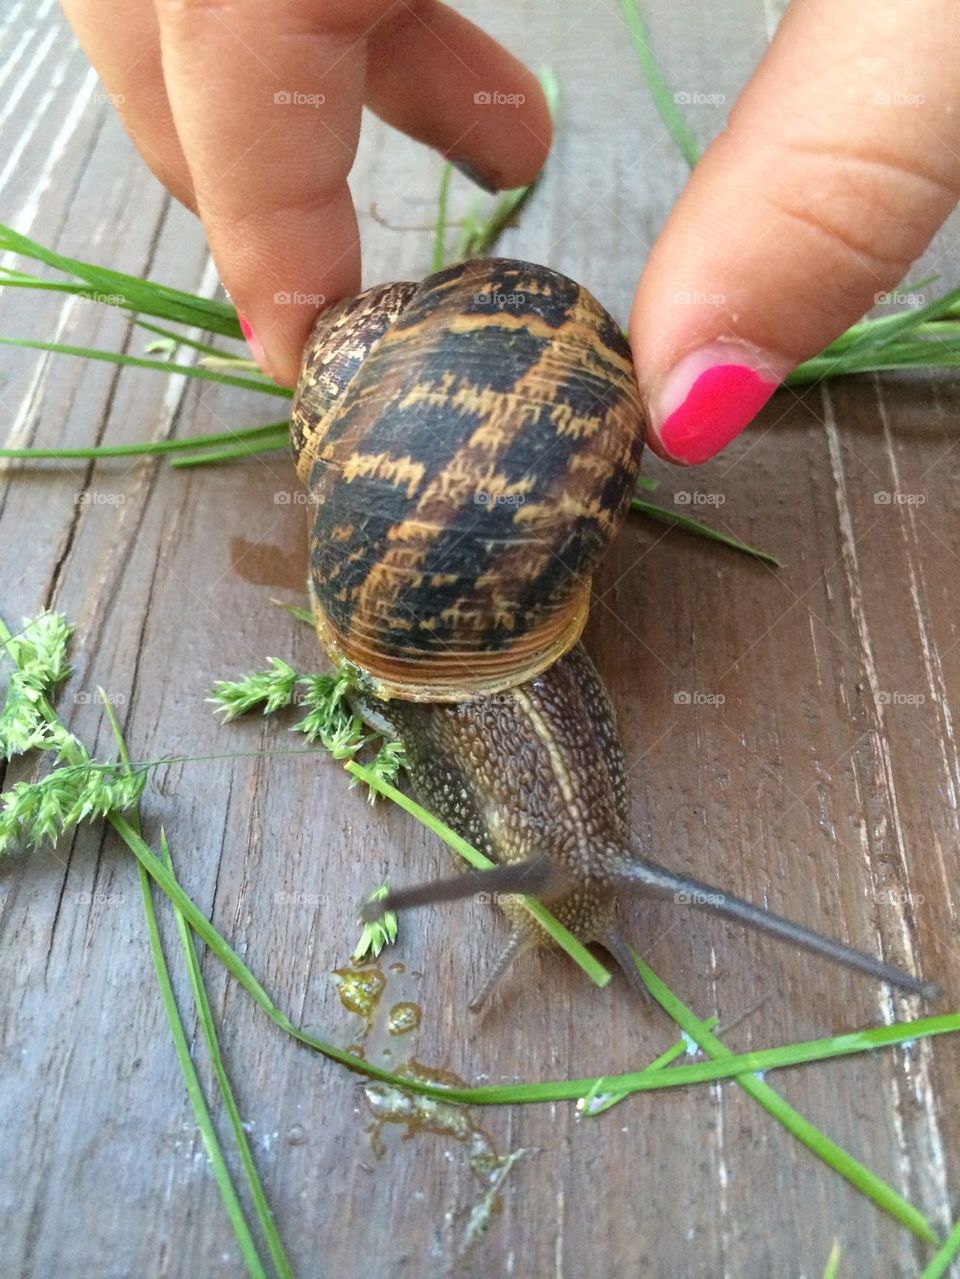 Baby girl hand taking a snail